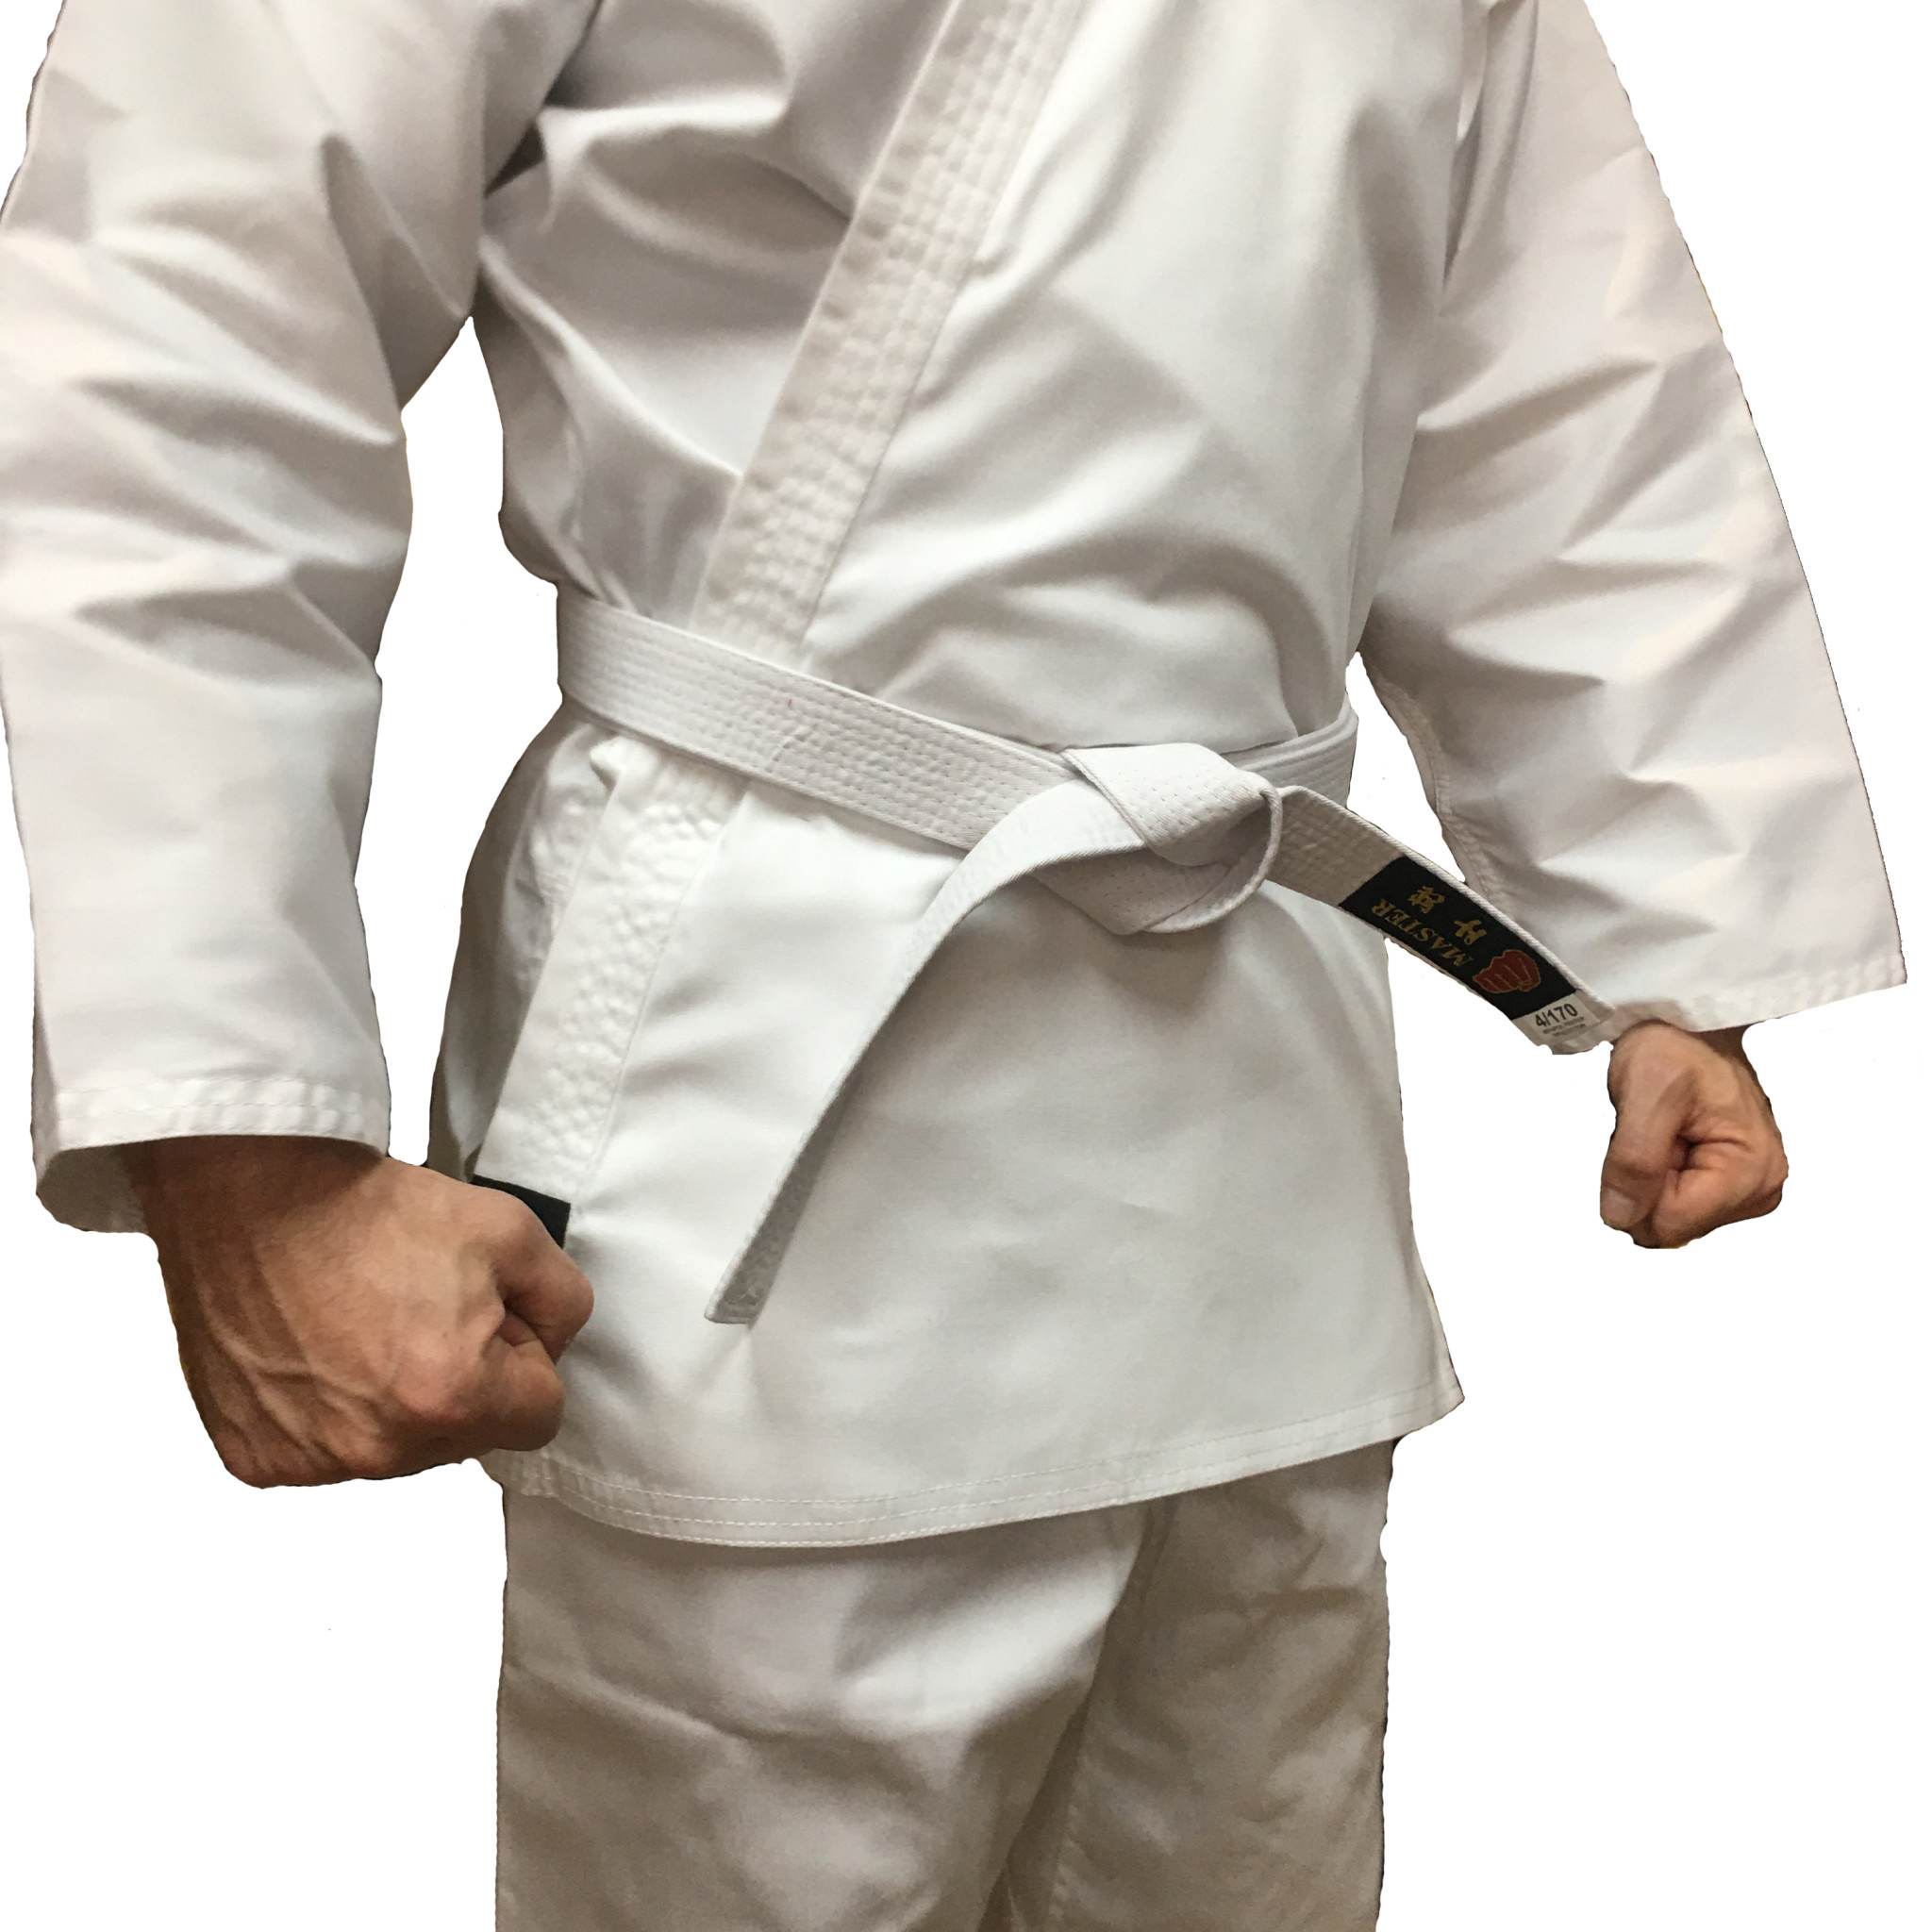 How to Wear a Karate Gi: 11 Steps (with Pictures) - wikiHow